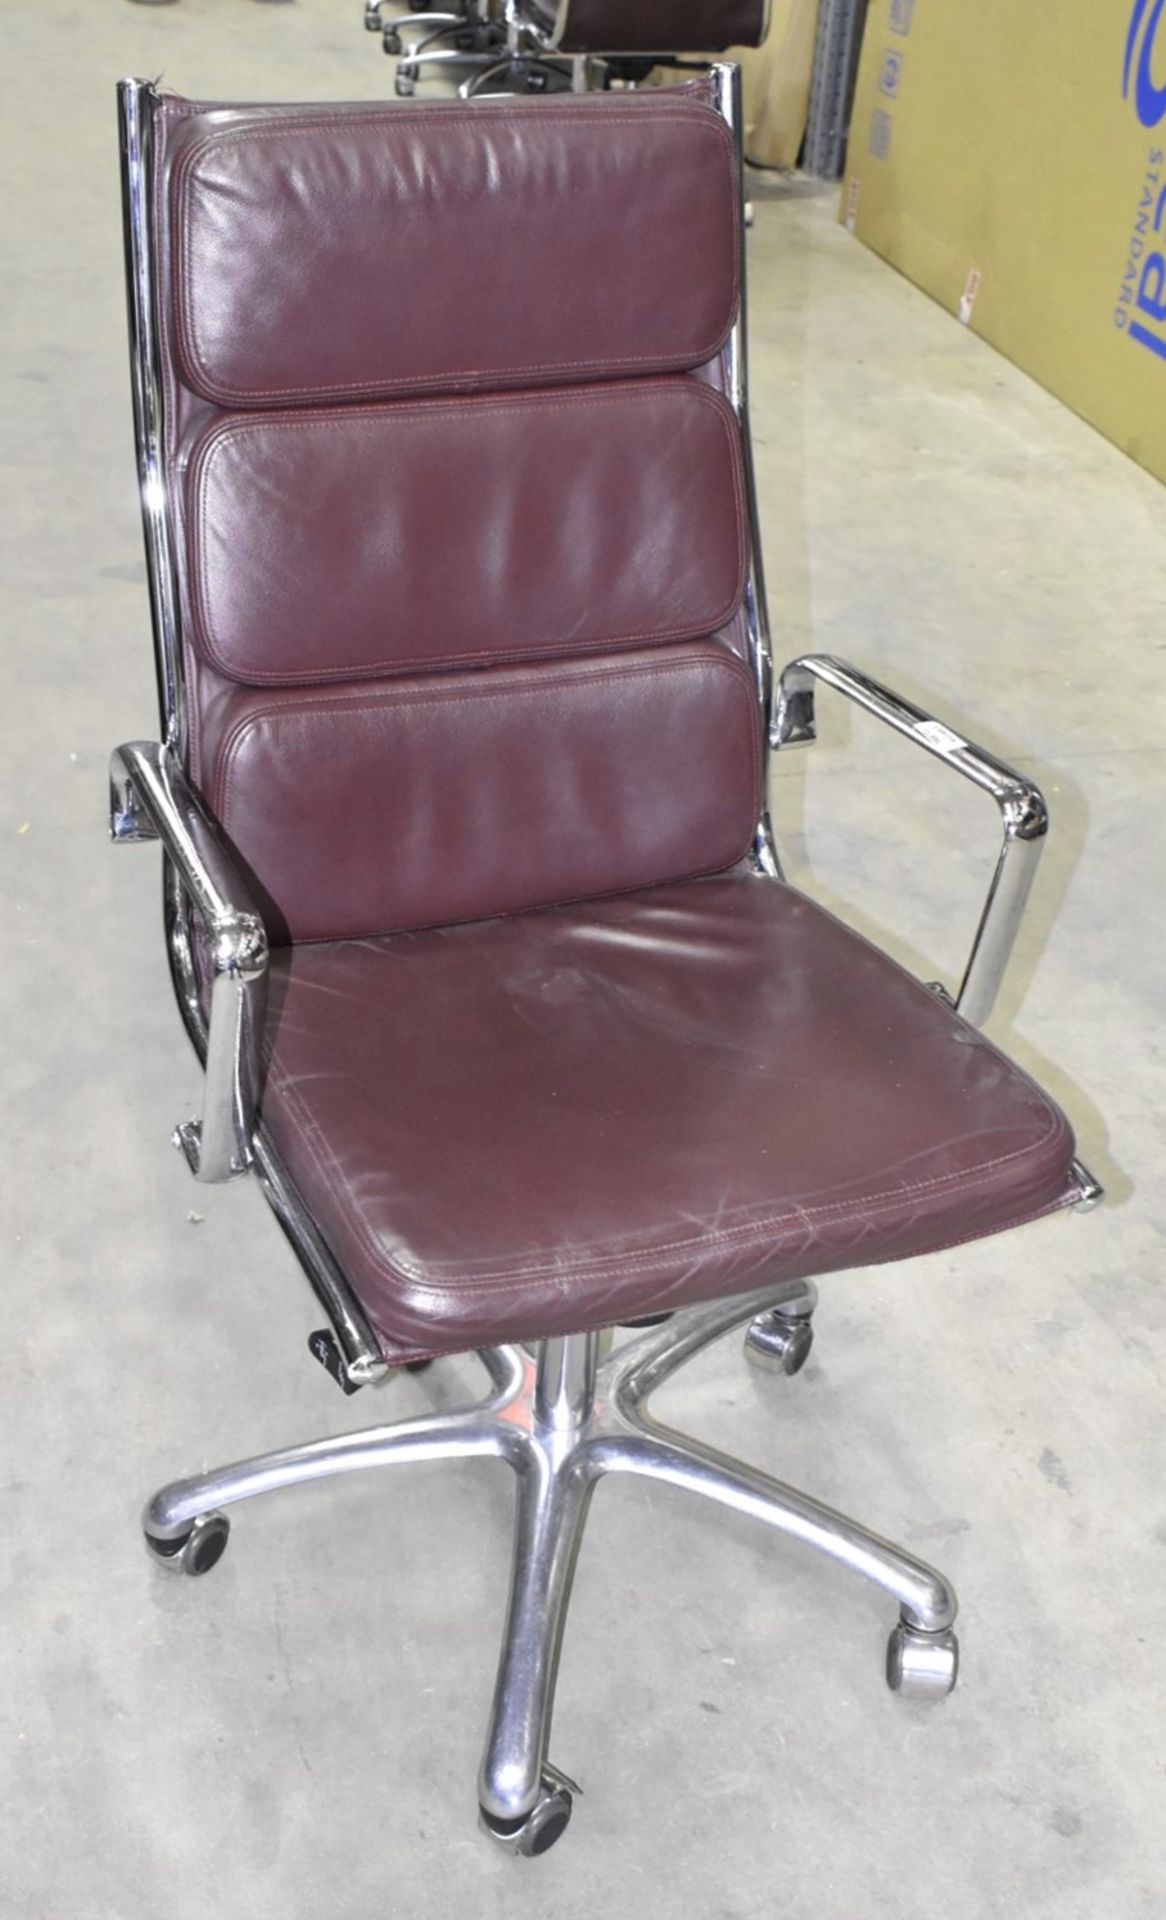 1 x LUXY Leather Upholstered Soft Pad Office Swivel Chair, Dark Brown - RRP £1,600 - Image 3 of 6